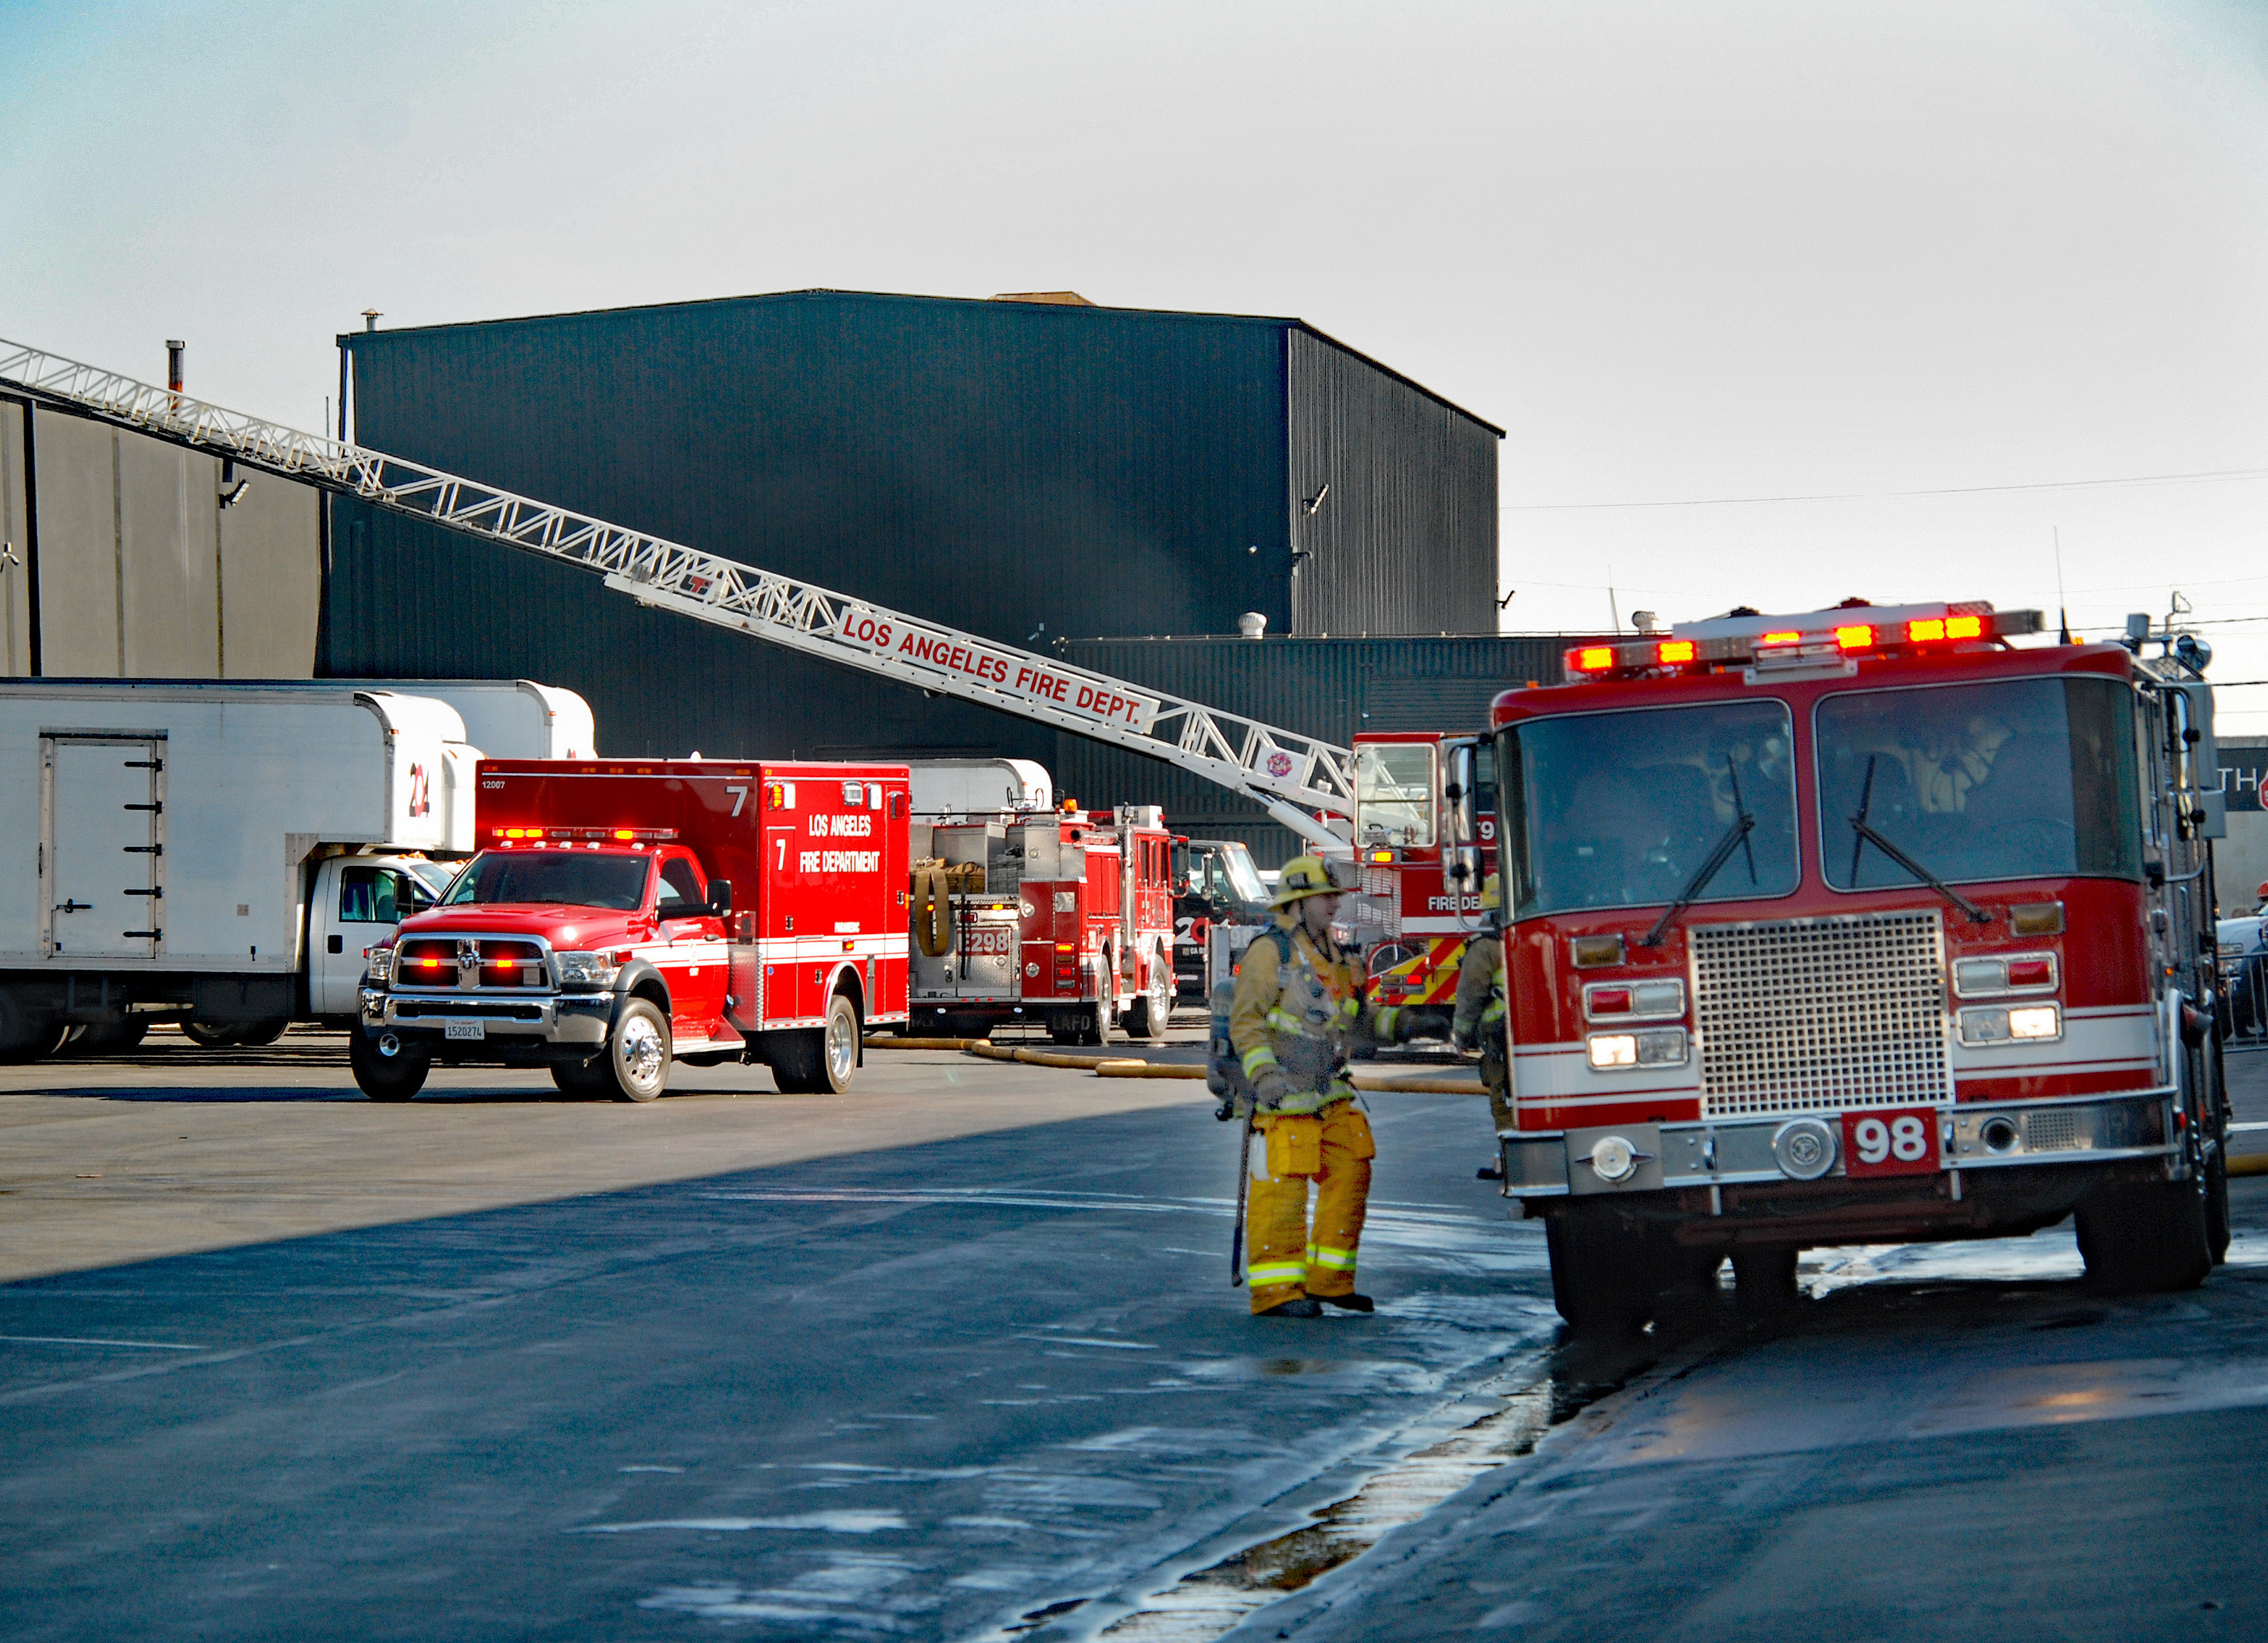 An LAFD ambulance, fire engine, and fire truck parked in front of an industrial building with the aerial ladder extending to the roof.